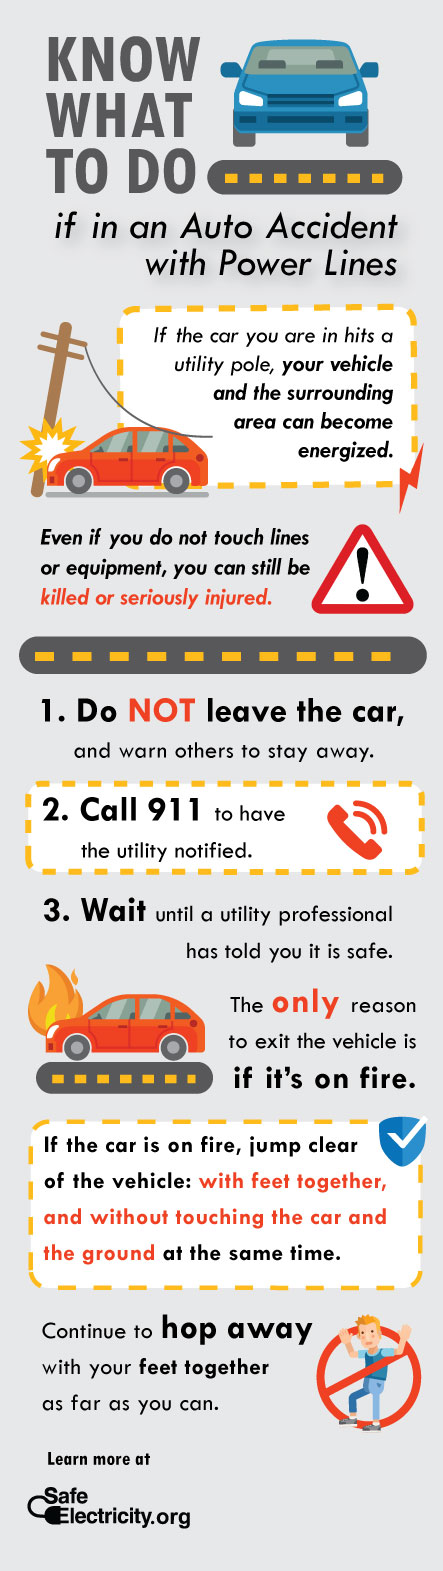 KNOW WHAT TO DO if in an Auto Accident with Power Lines | If the car you are in hits a utility pole, your vehicle and the surrounding area can become energized. Even if you do not touch lines or equipment, you can still be killed or seriously injured. 1.) Do NOT leave the car, and warn others to stay away. 2.) Call 911 to have the utility notified. 3.) Wait until a utility professional has told you it is safe. The only reason to exit the vehicle is if it's on fire. If the car is on fire, jump clear of the vehicle: with feet together, and without touching the car and the ground at the same time. Continue to hop away with your feet together as far as you can. Learn more at SafeElectricity.com.